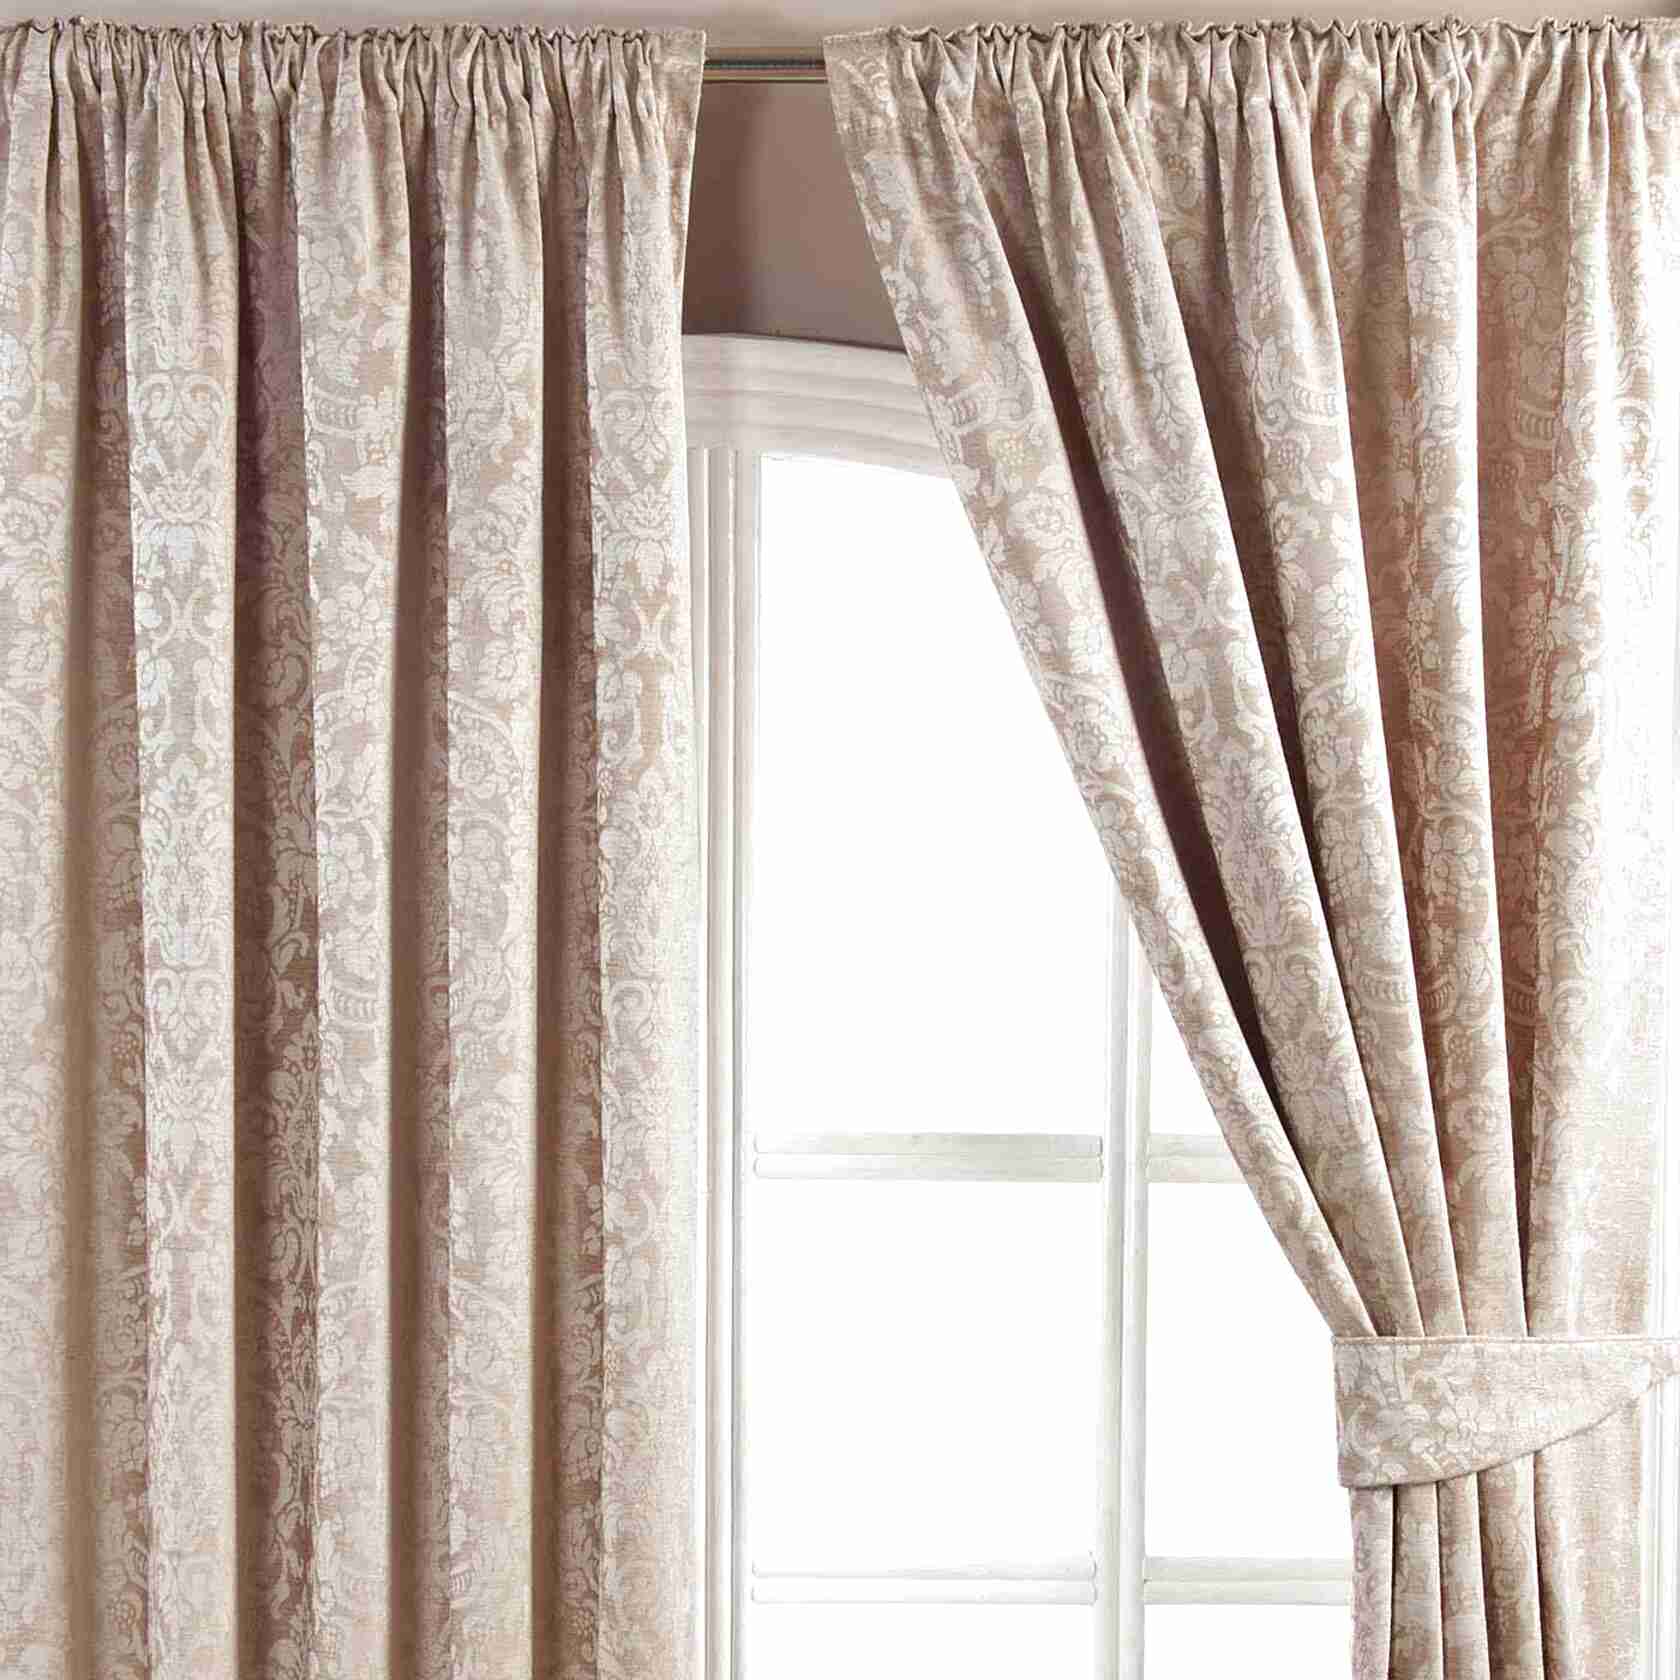 Jacquard Pencil Pleat Curtains for sale in UK | 68 used Jacquard Pencil ...